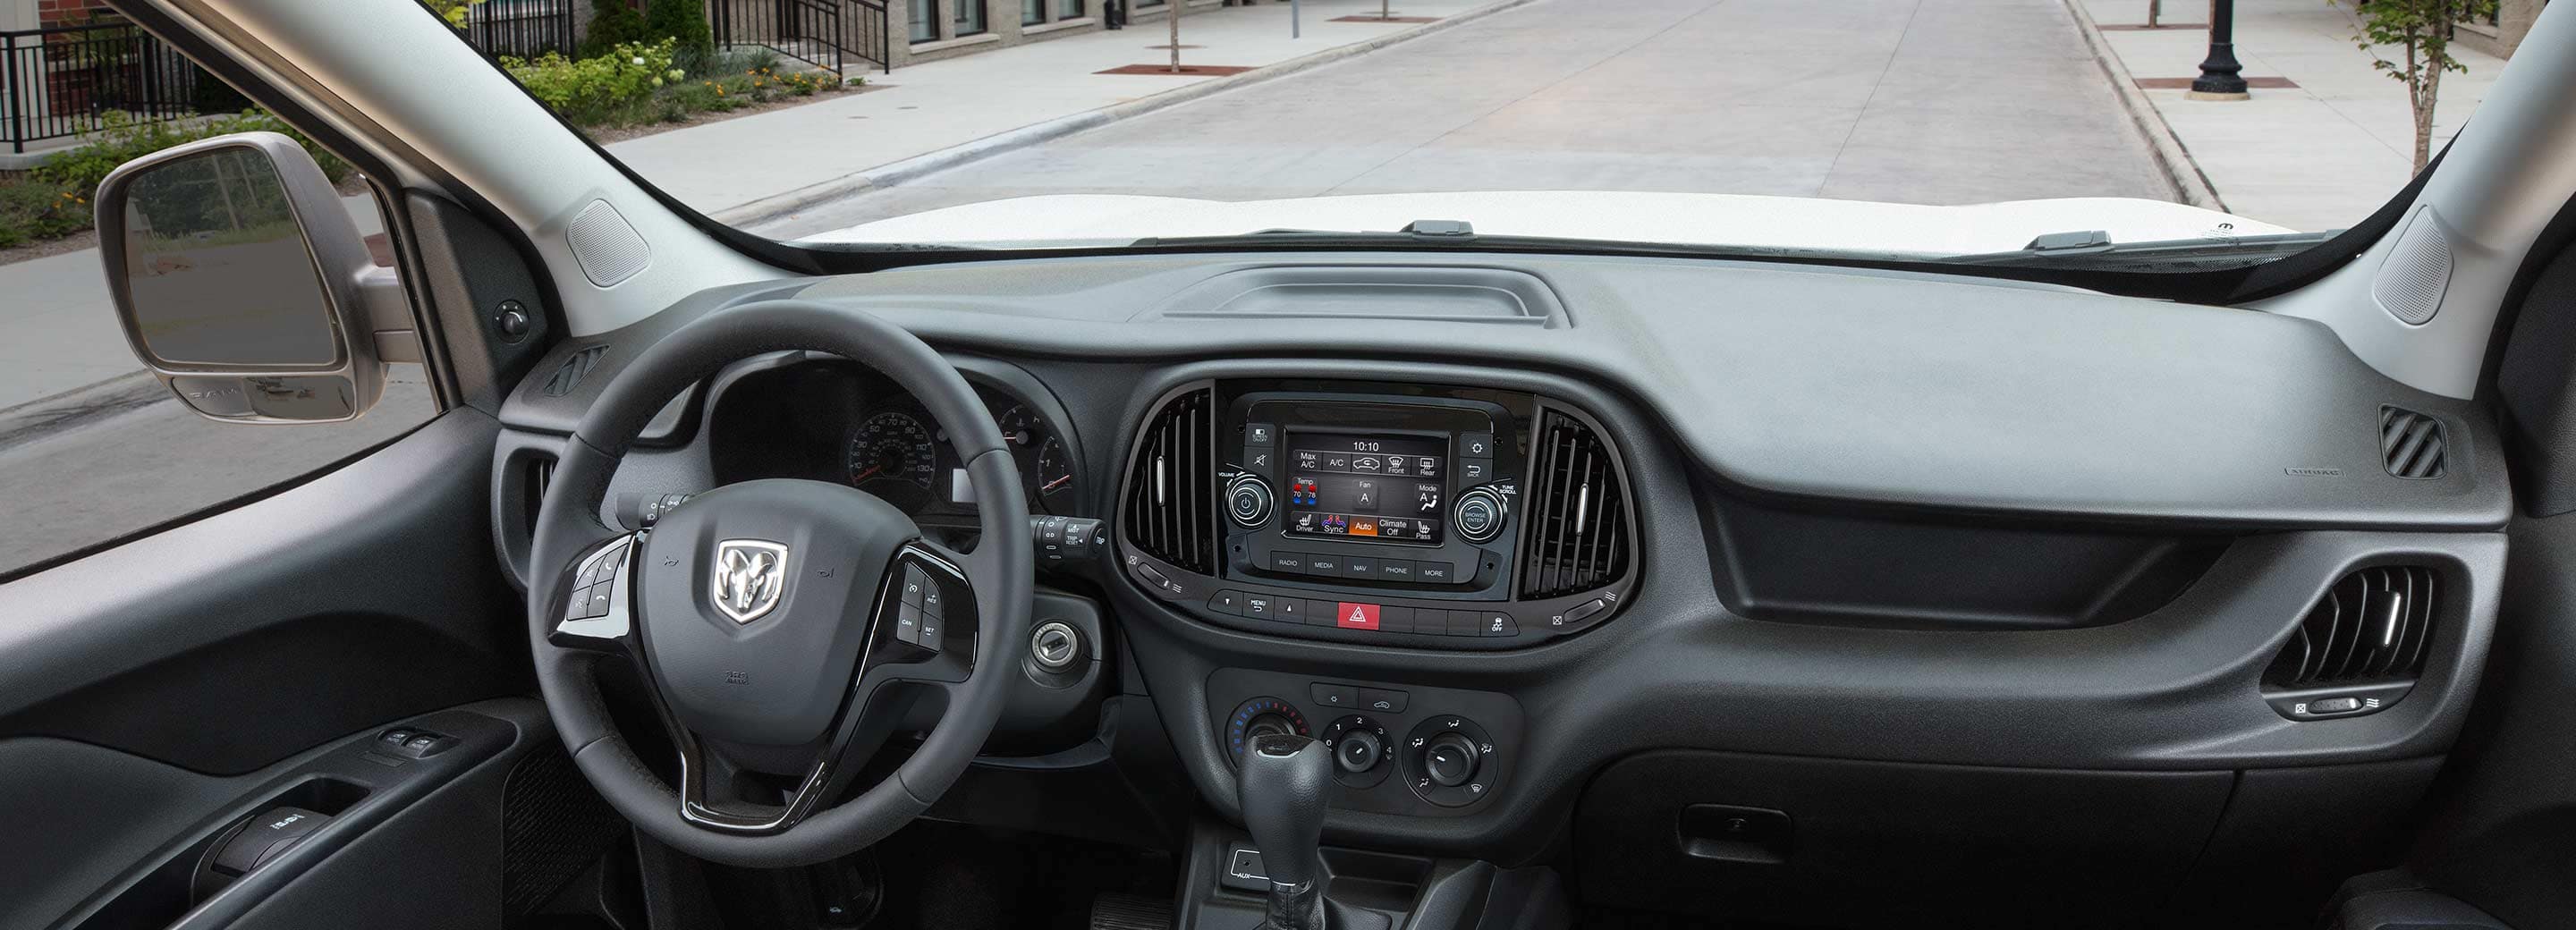 The interior of the 2022 Ram ProMaster City, focusing on the steering wheel, dashboard, touchscreen and shift controls.